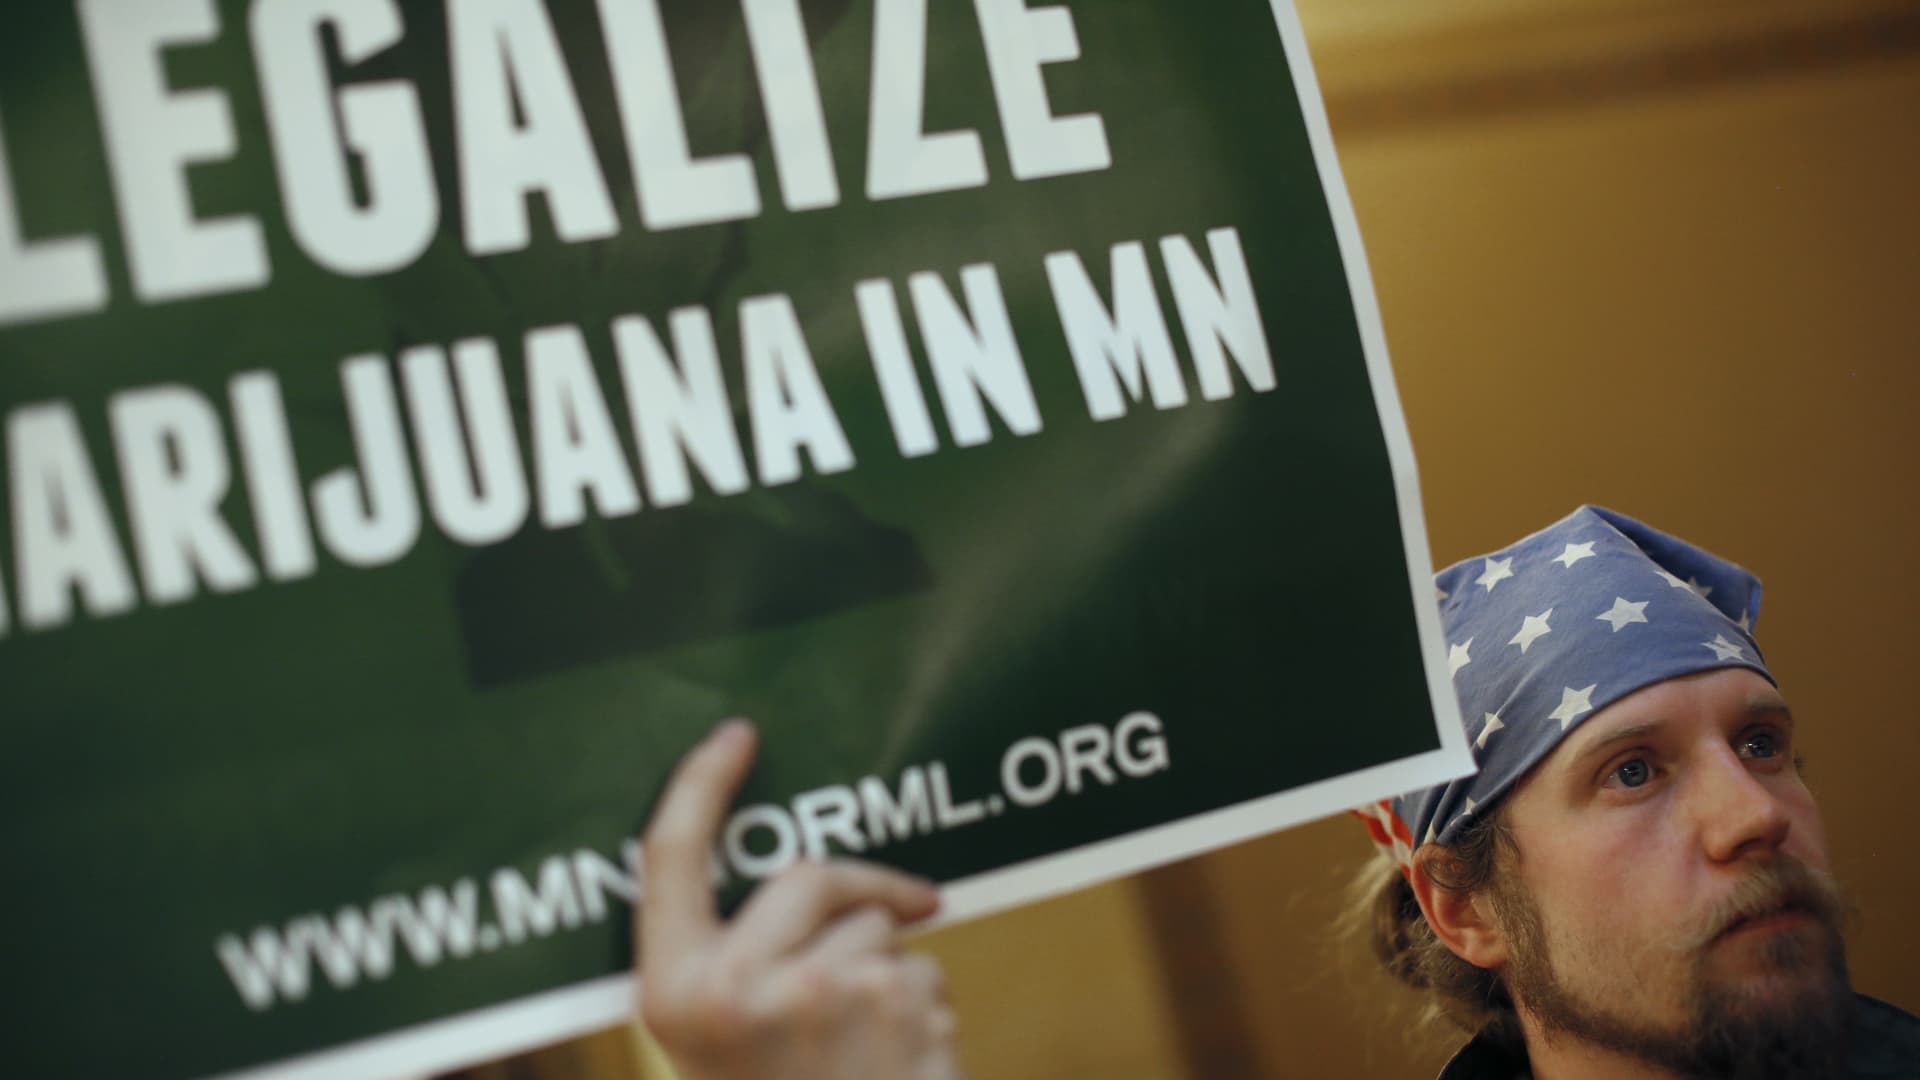 Leif Hamre of Minneapolis attends a rally at the state Capitol in St. Paul, Minnesota, held by members of Minnesota NORML, advocating for the legalization of cannabis, April 23, 2014.